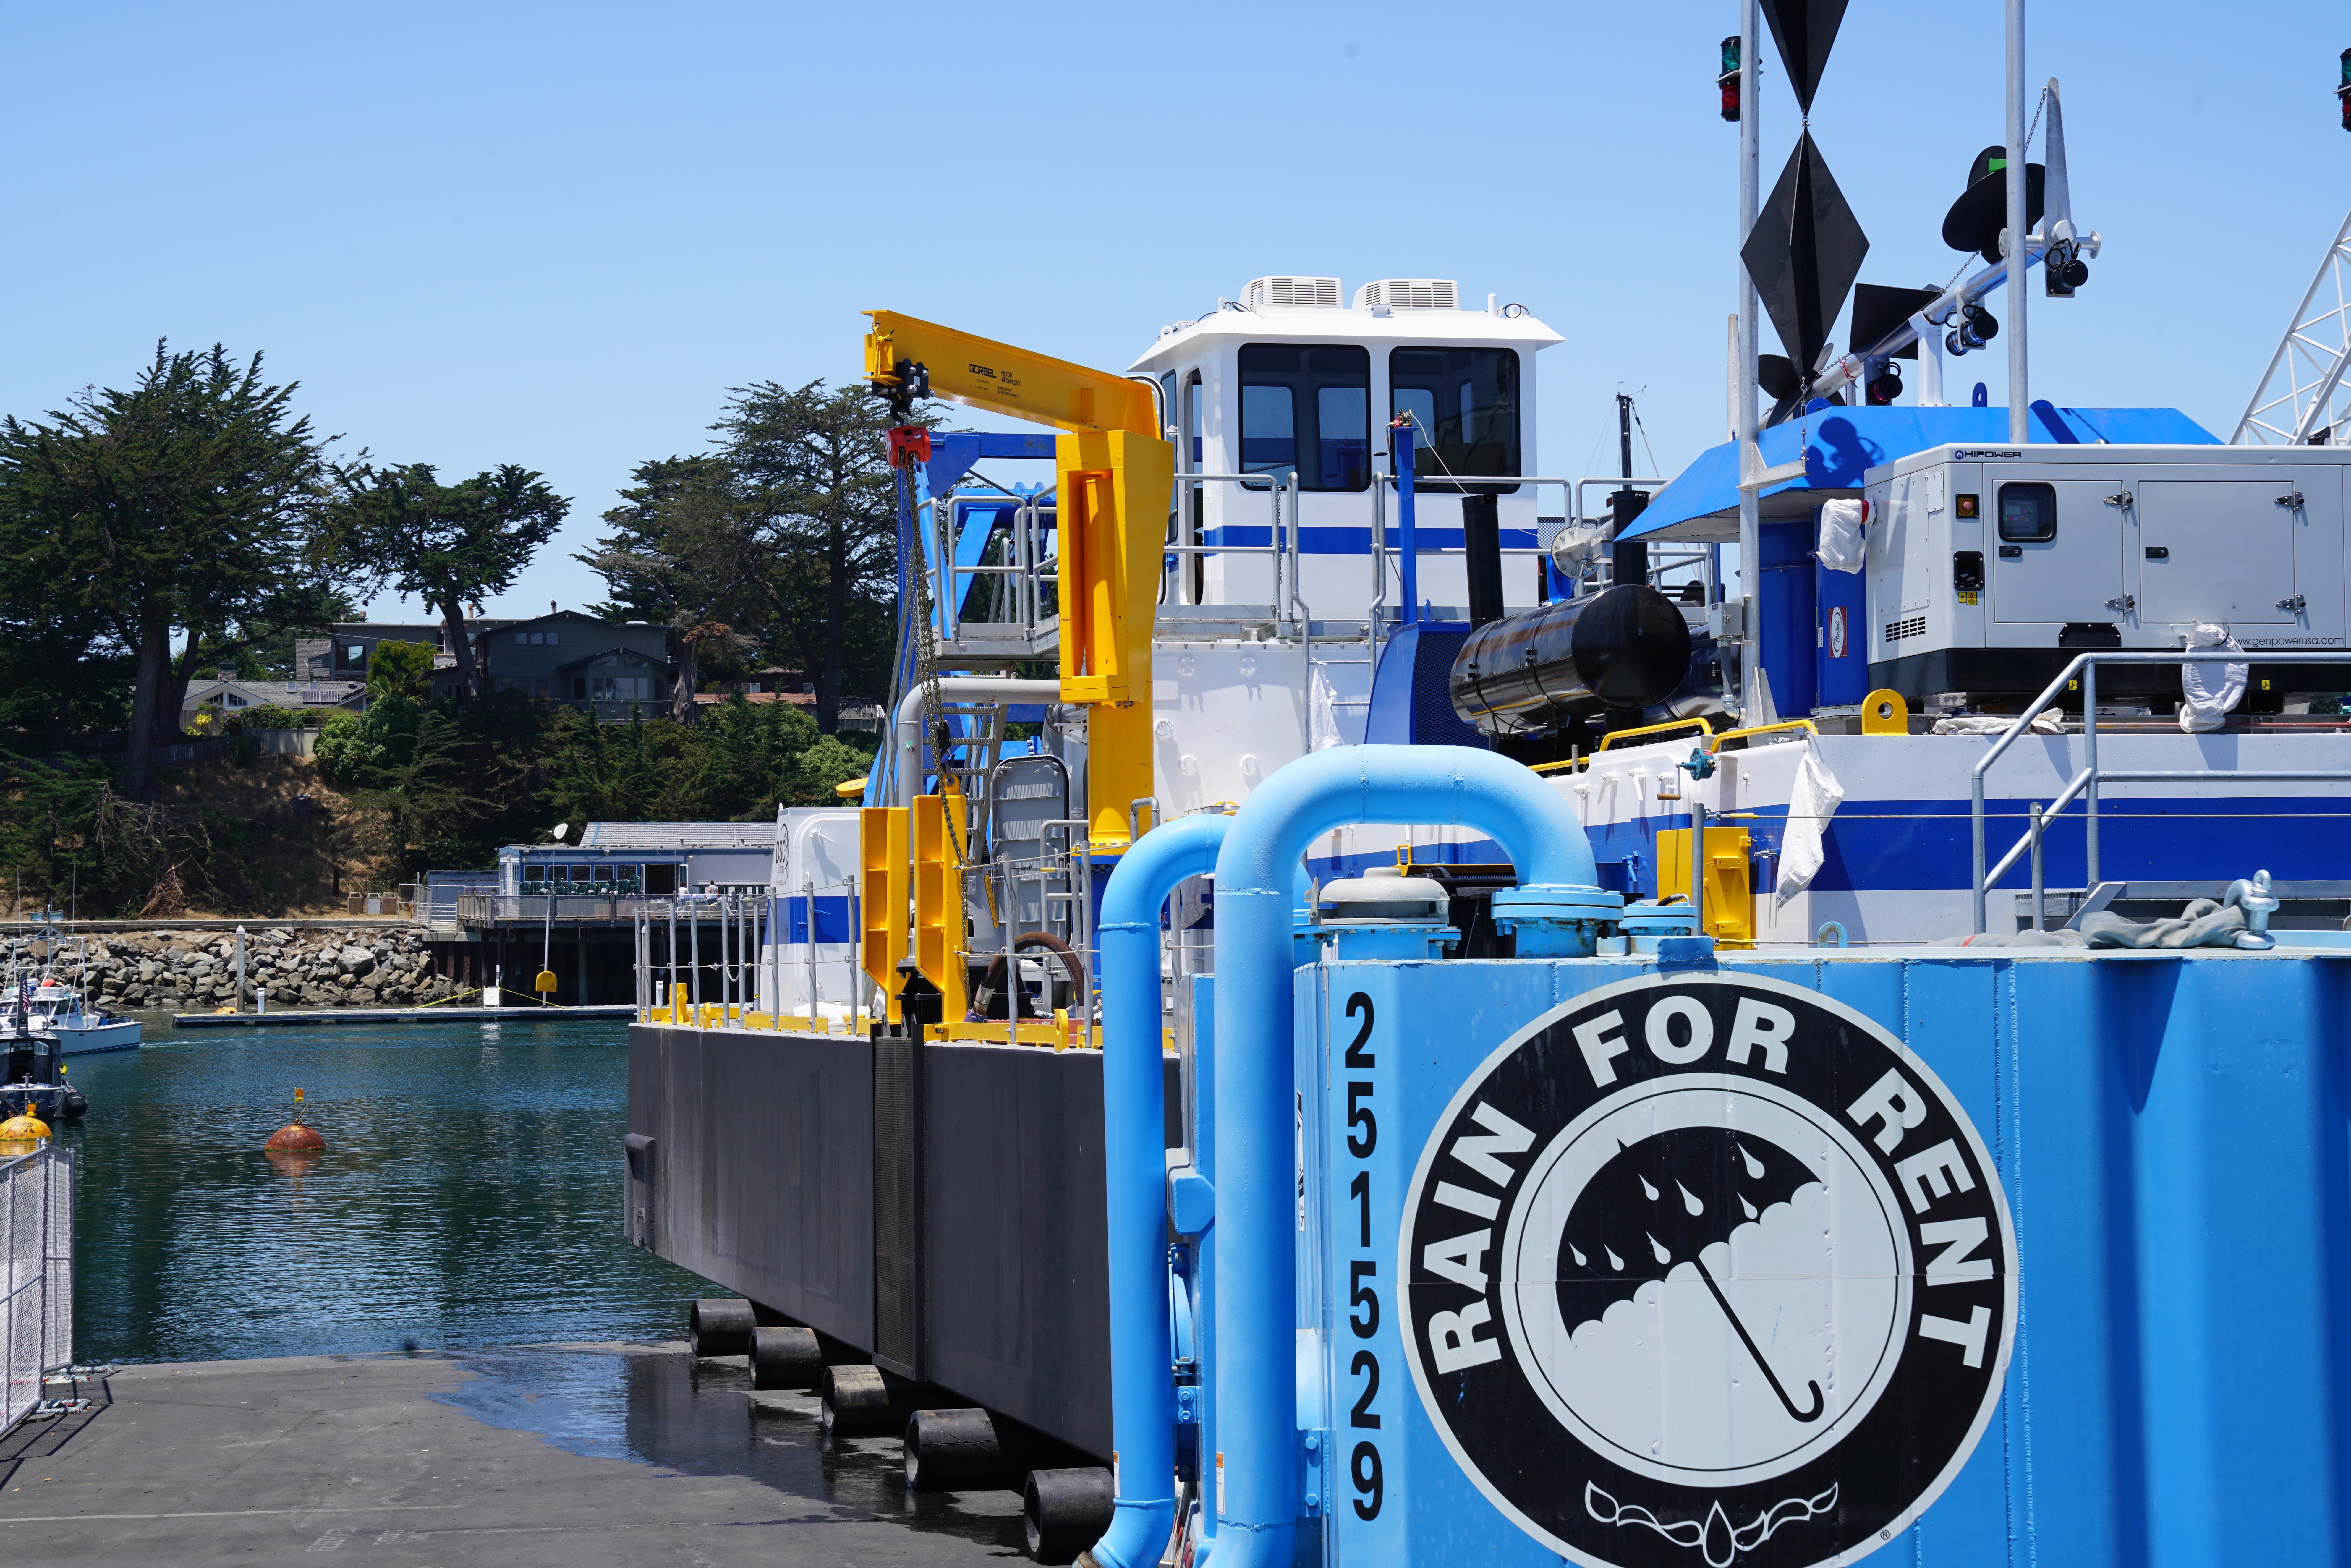 The new dredge in the Santa Cruz Harbor will be launched tomorrow 